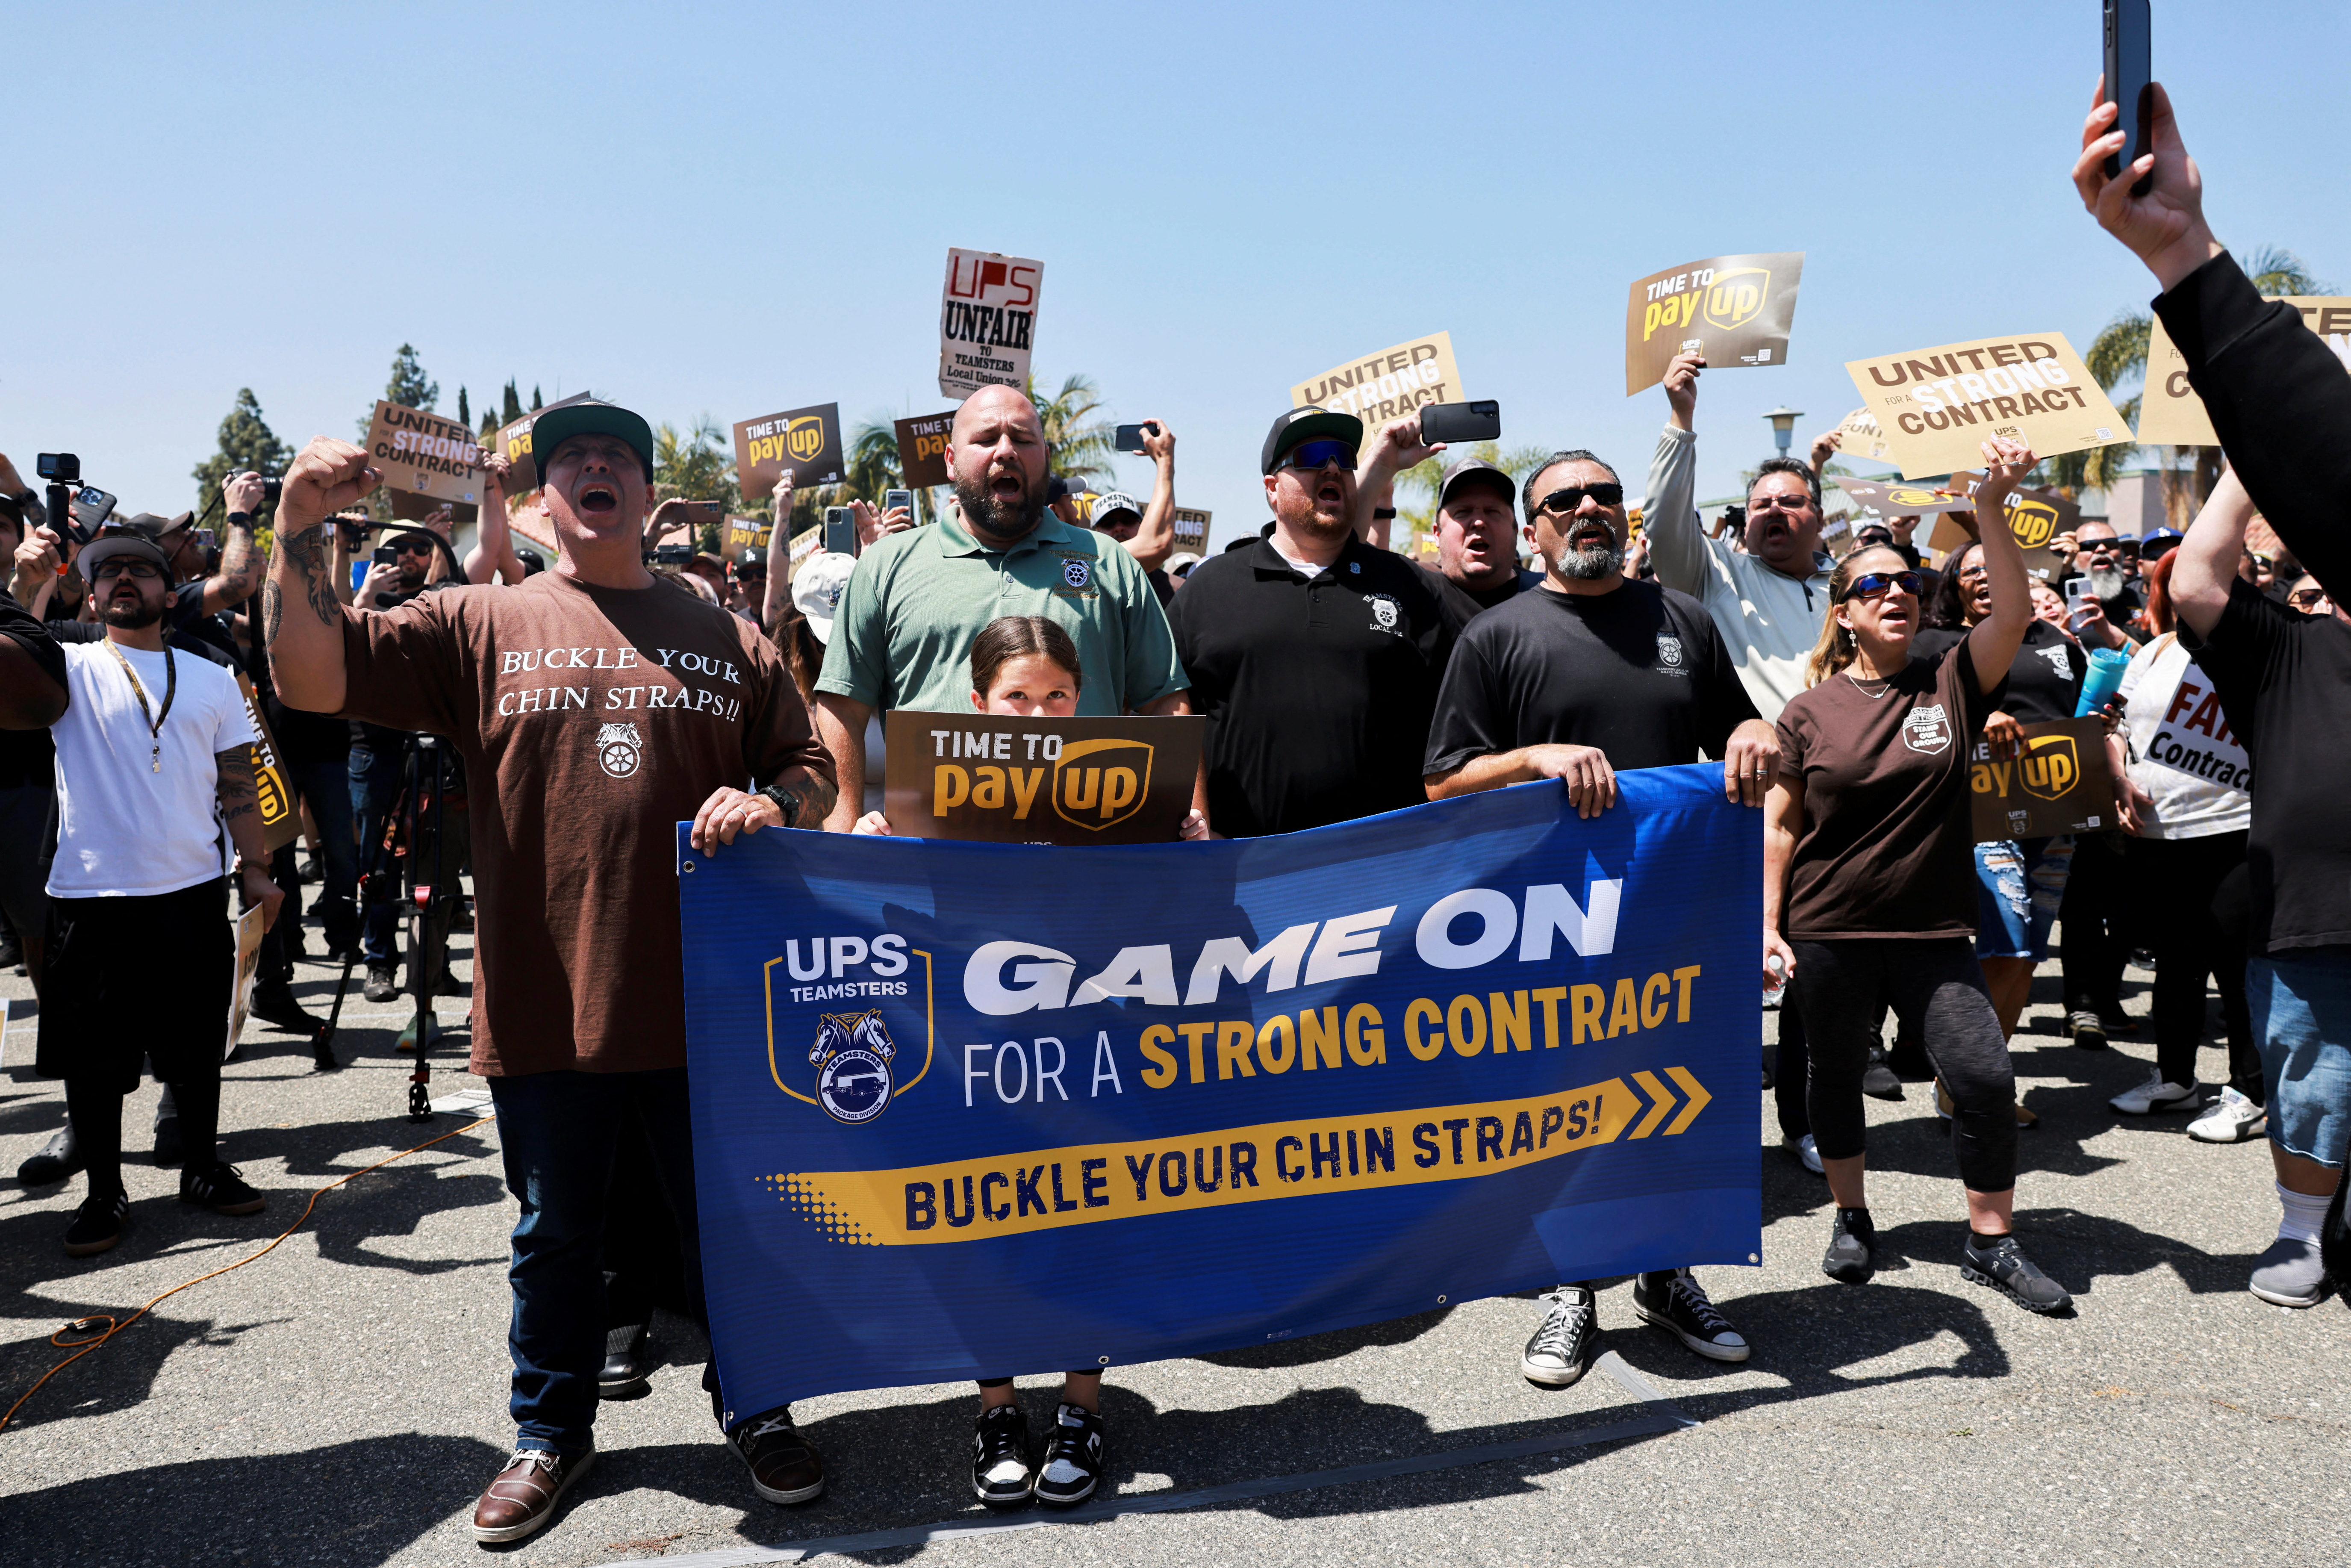 UPS Strike: Managers Training to Move Packages If Teamsters Talks Fail